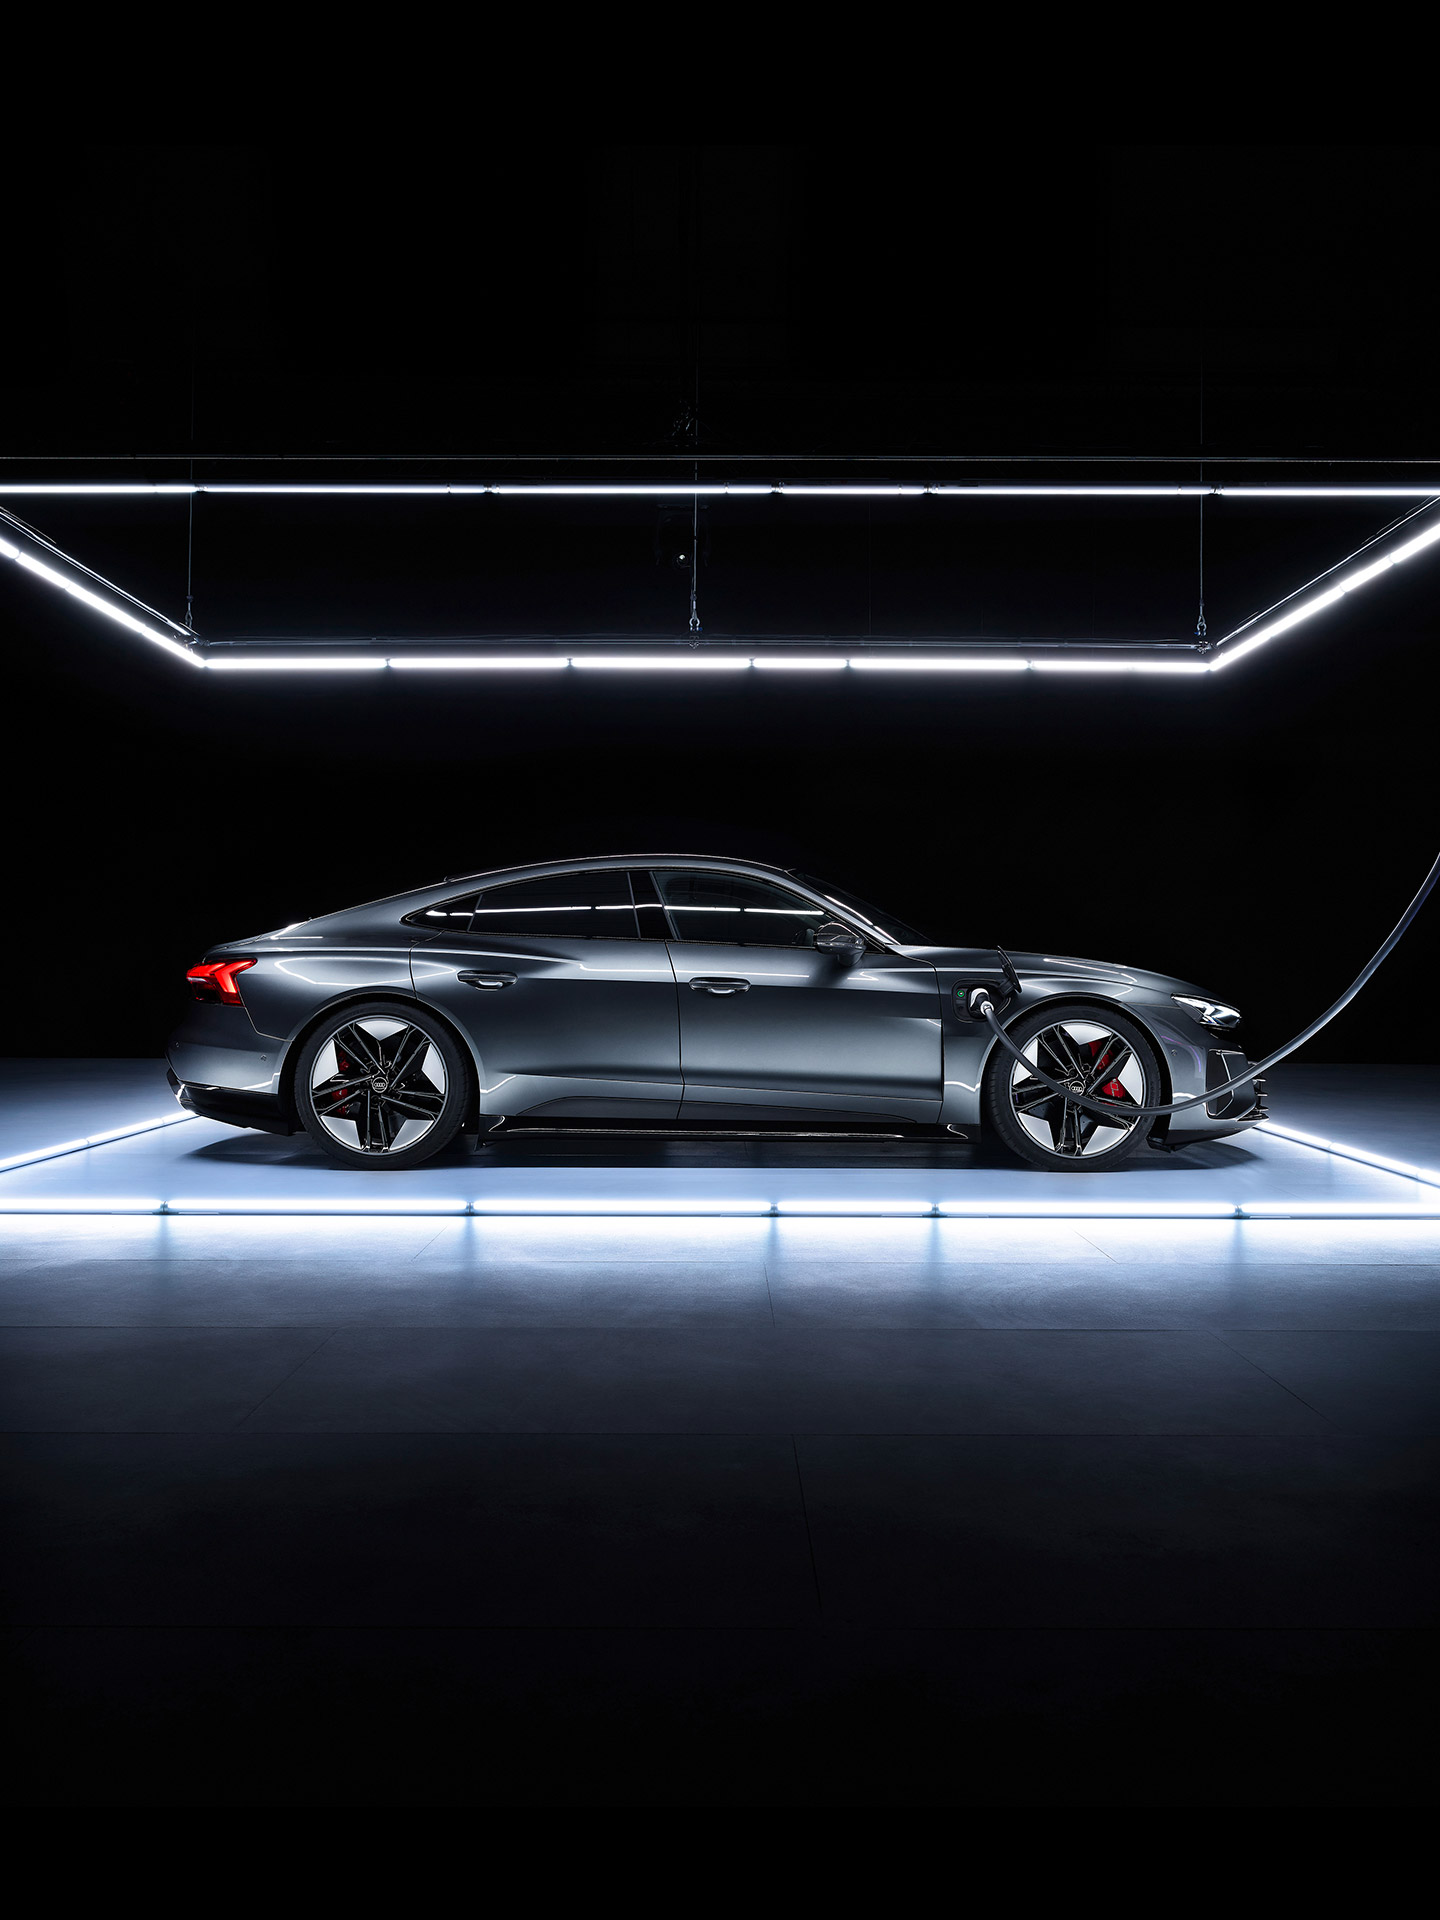 Shifting image of a grey Audi e-tron GT parked in front of a daytime city skline and on an illuminated platform in a dark room. 